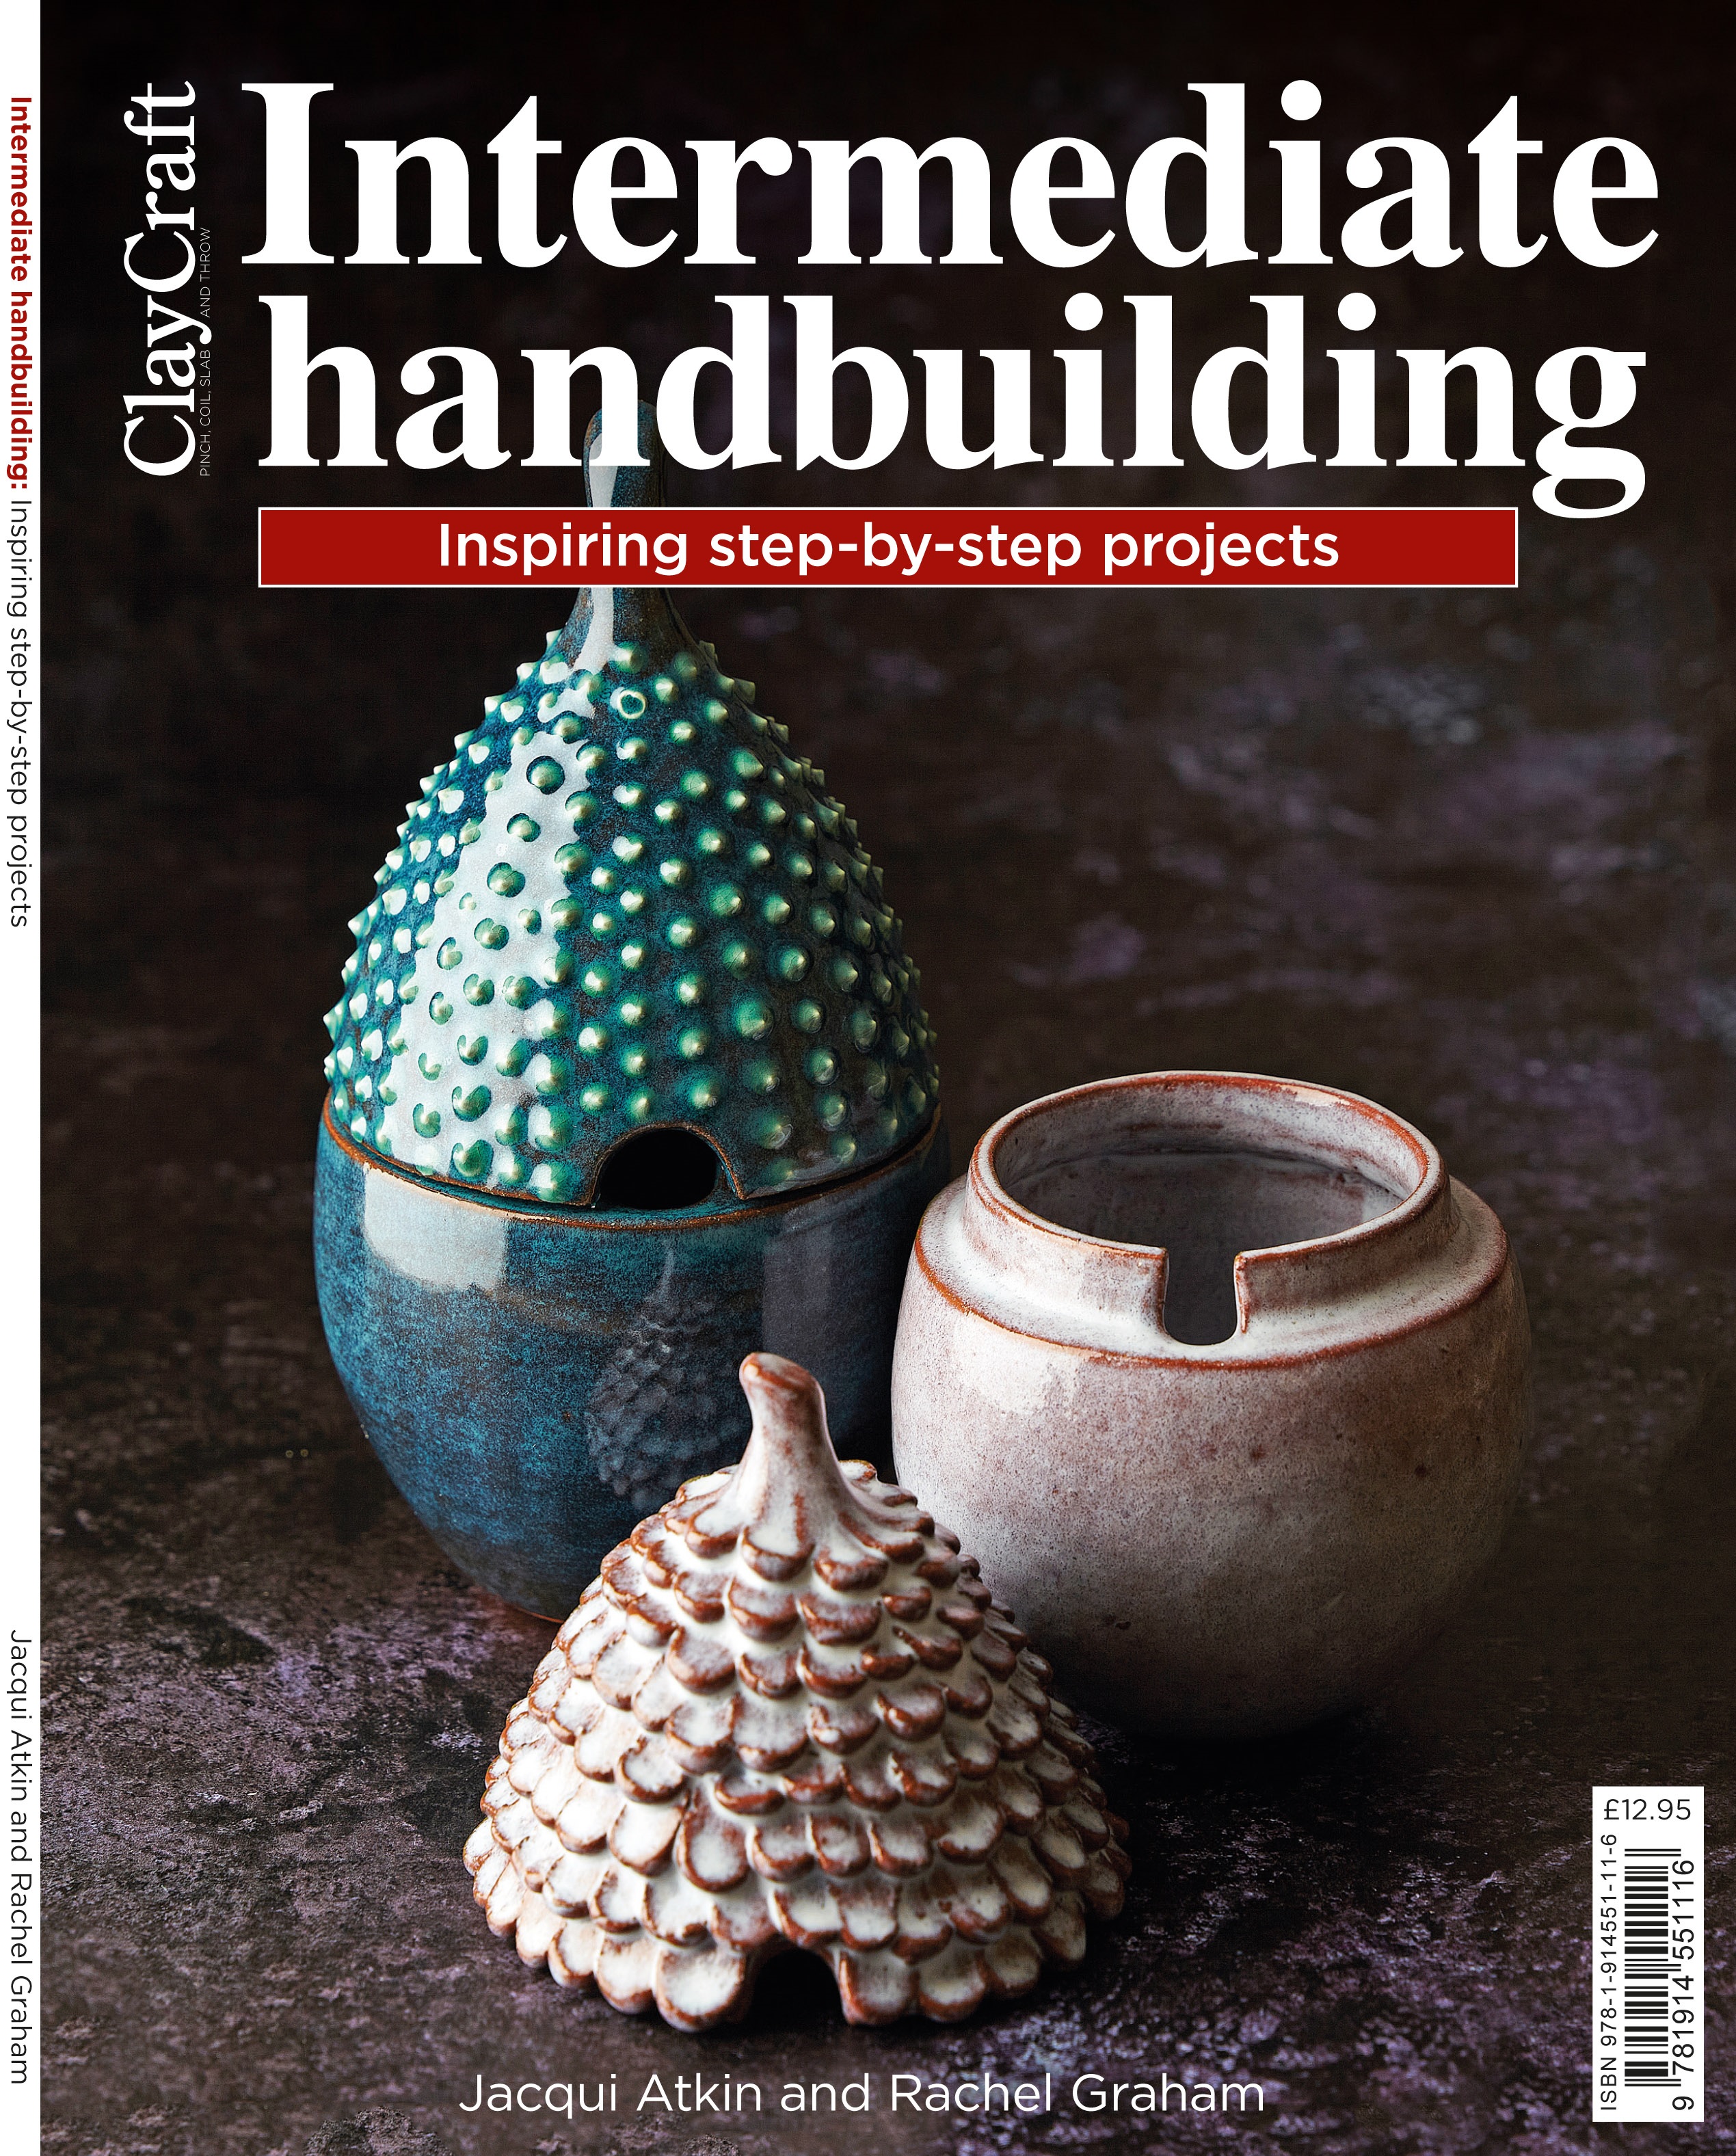 Intermediate Handbuilding - Inspiring Step-by-Step Pottery Projects